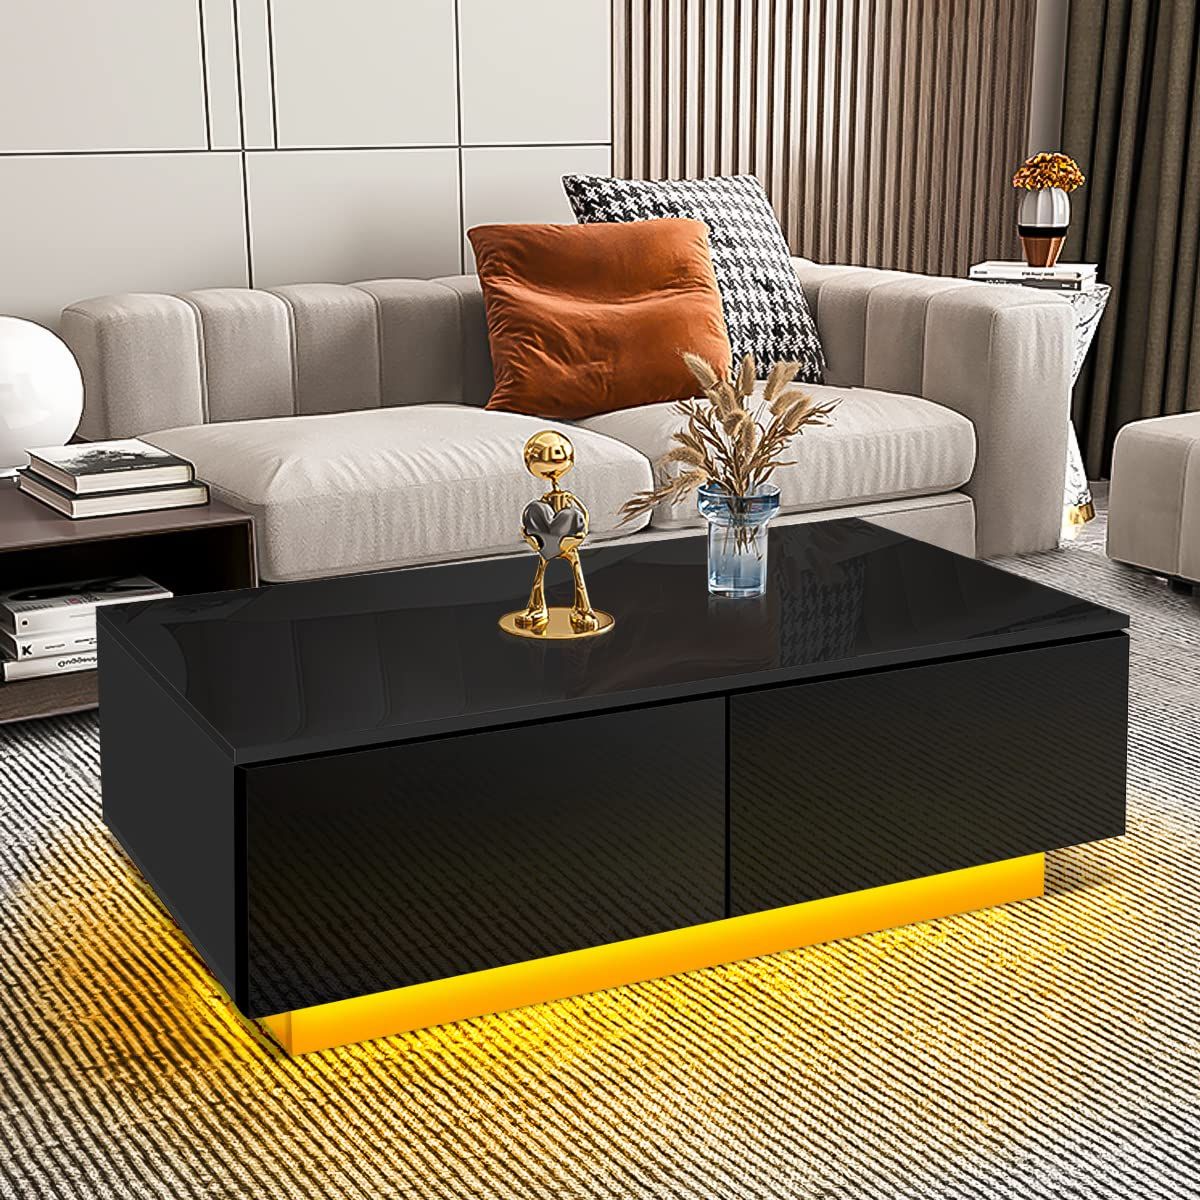 Latest Buy Woodyhome Led Coffee Tables For Living Room Black Coffee Table With For Led Coffee Tables With 4 Drawers (View 7 of 15)